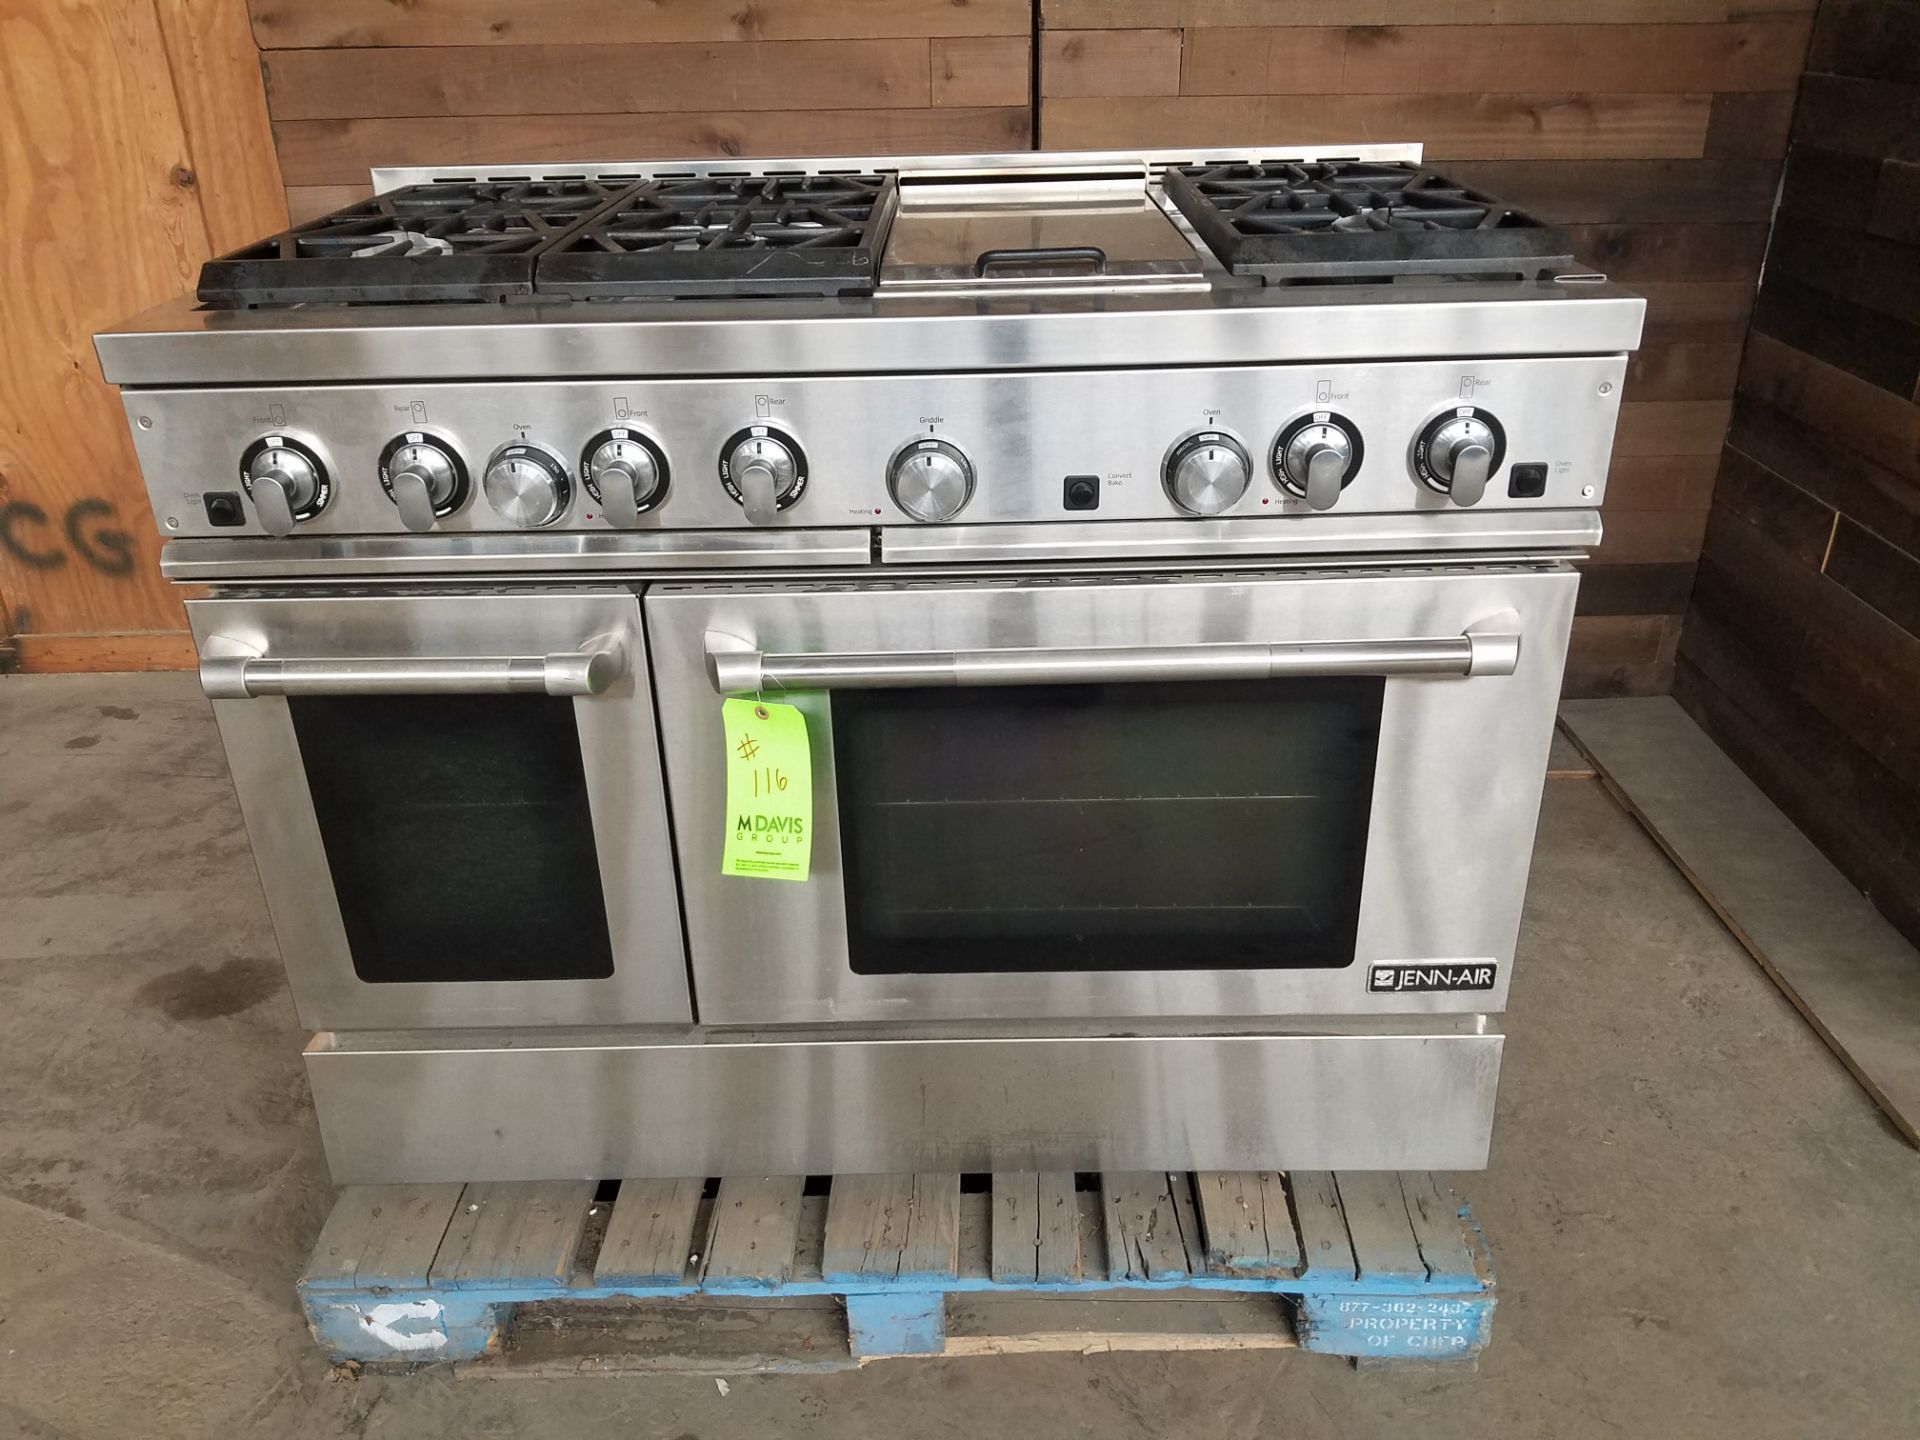 Jenn-Air Maytag PRG4810 Gas Oven, S/N 10000156PC with Griddle, Boiler and 6-Burner Stove